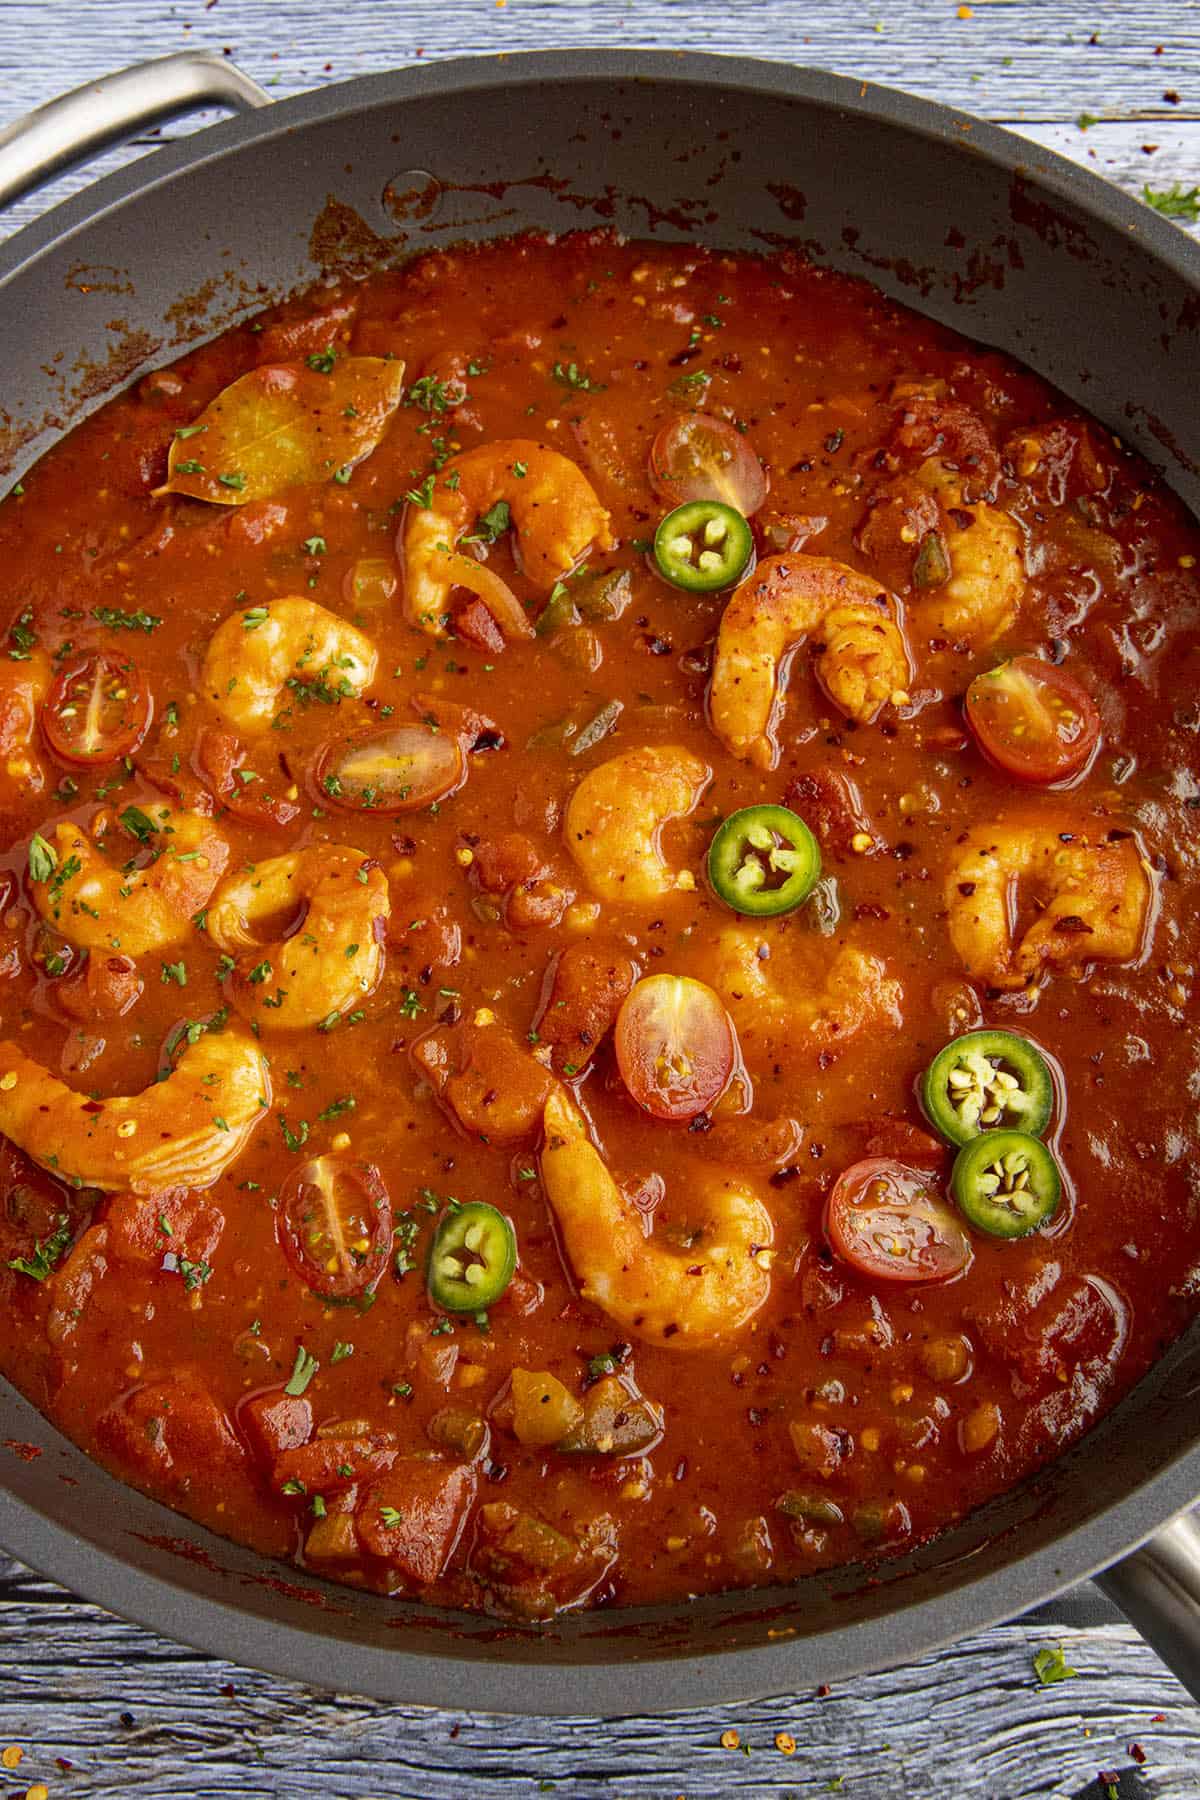 Shrimp Creole in a pan, garnished with peppers and chili flakes